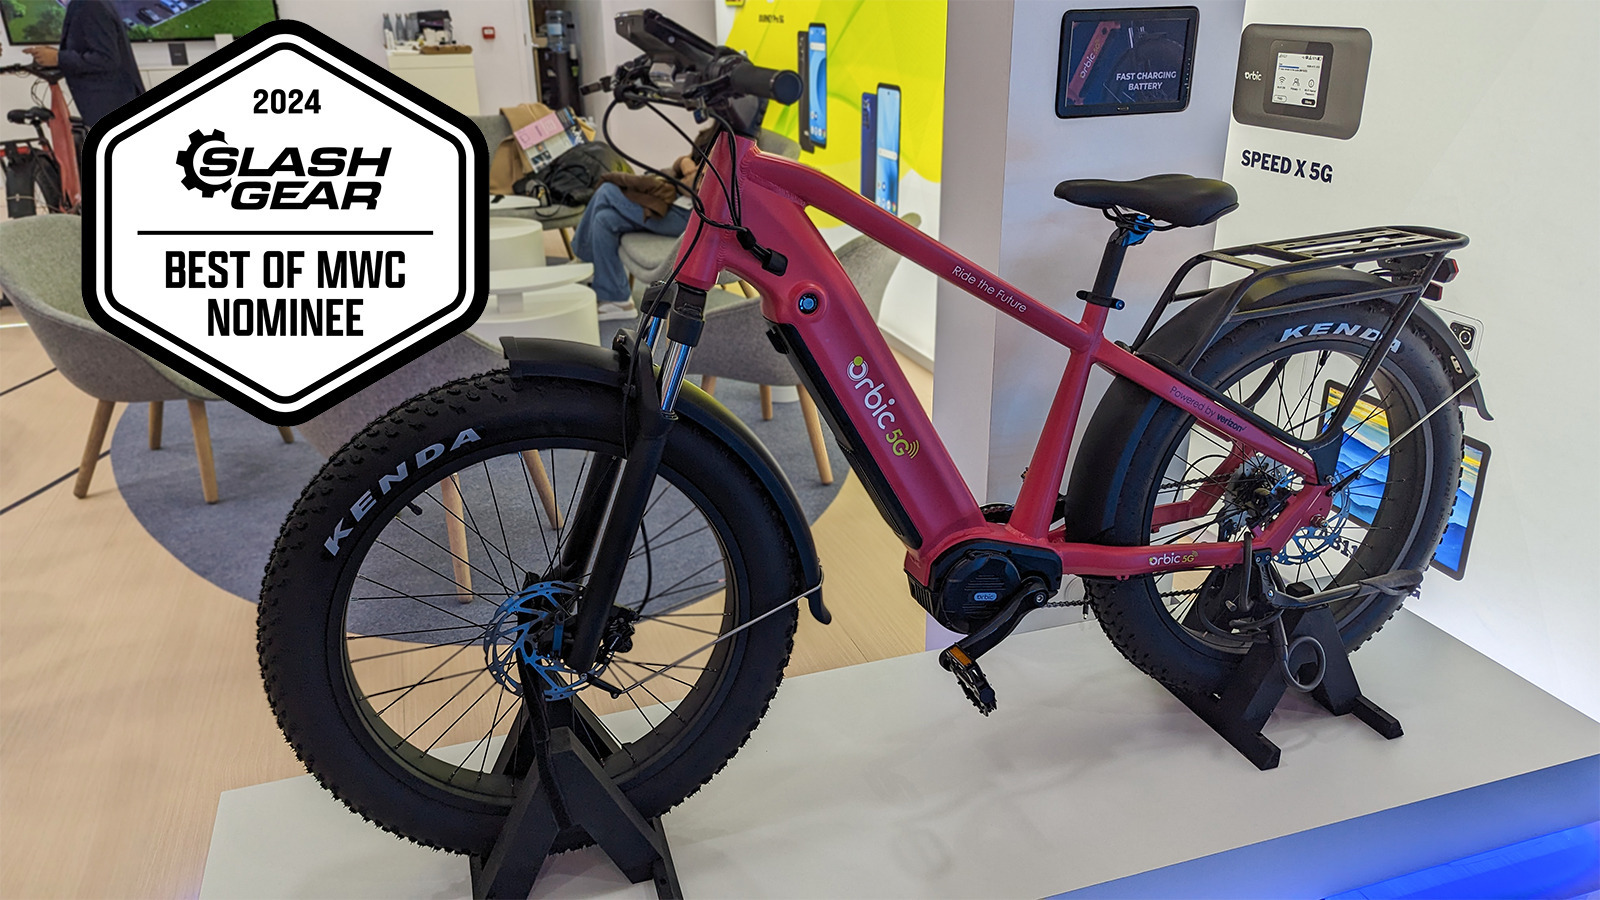 Best Of MWC 2024 Nominee: Orbic 5G eBike